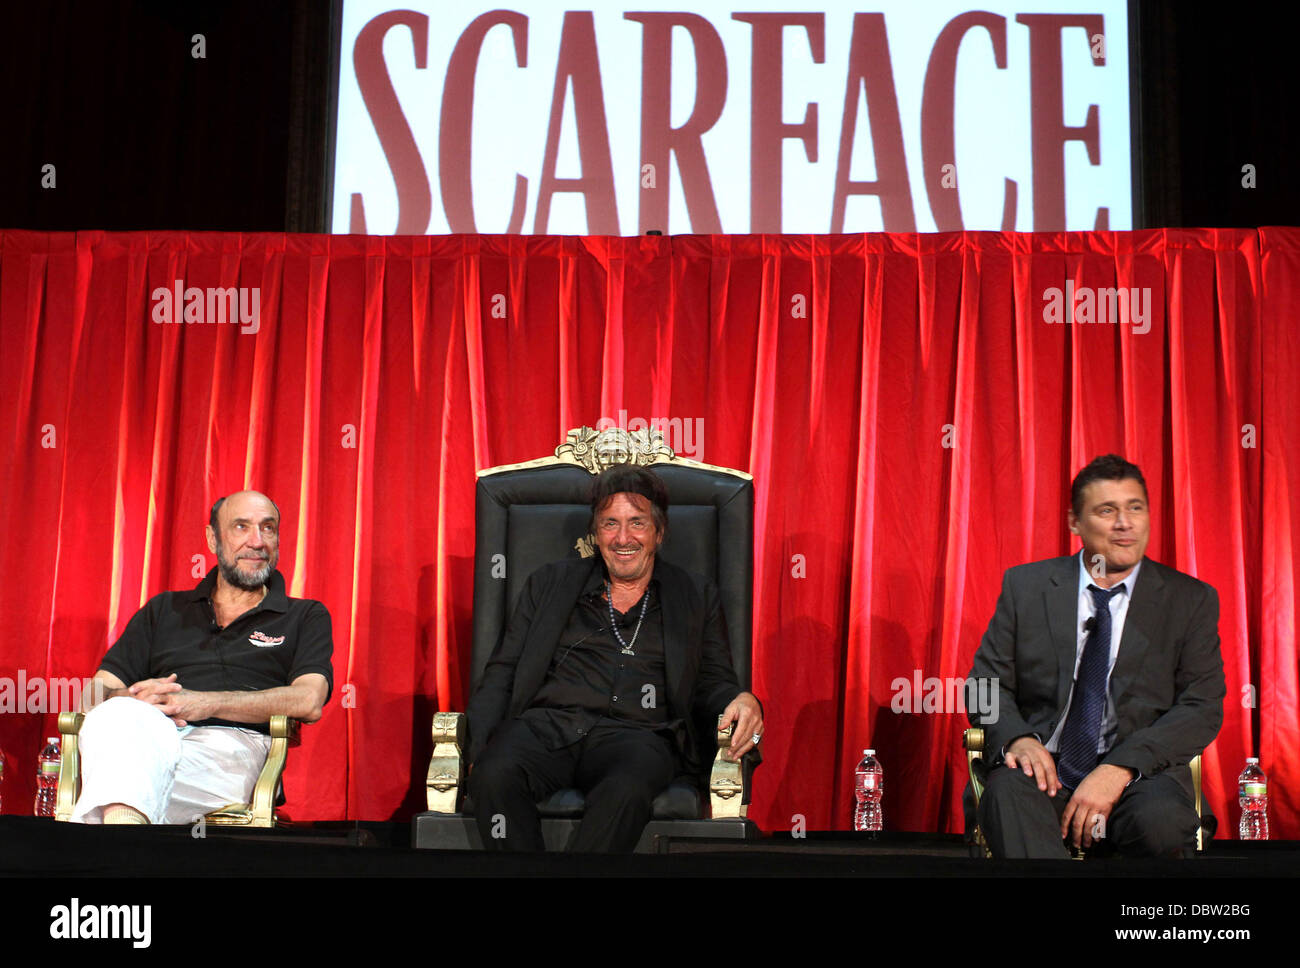 F. Murray Abraham, Al Pacino and Steven Bauer The Scarface Blu-Ray DVD release party Q&A hosted by Ciroc held at Belasco Theatre Los Angeles, California - 23.08.11 Stock Photo